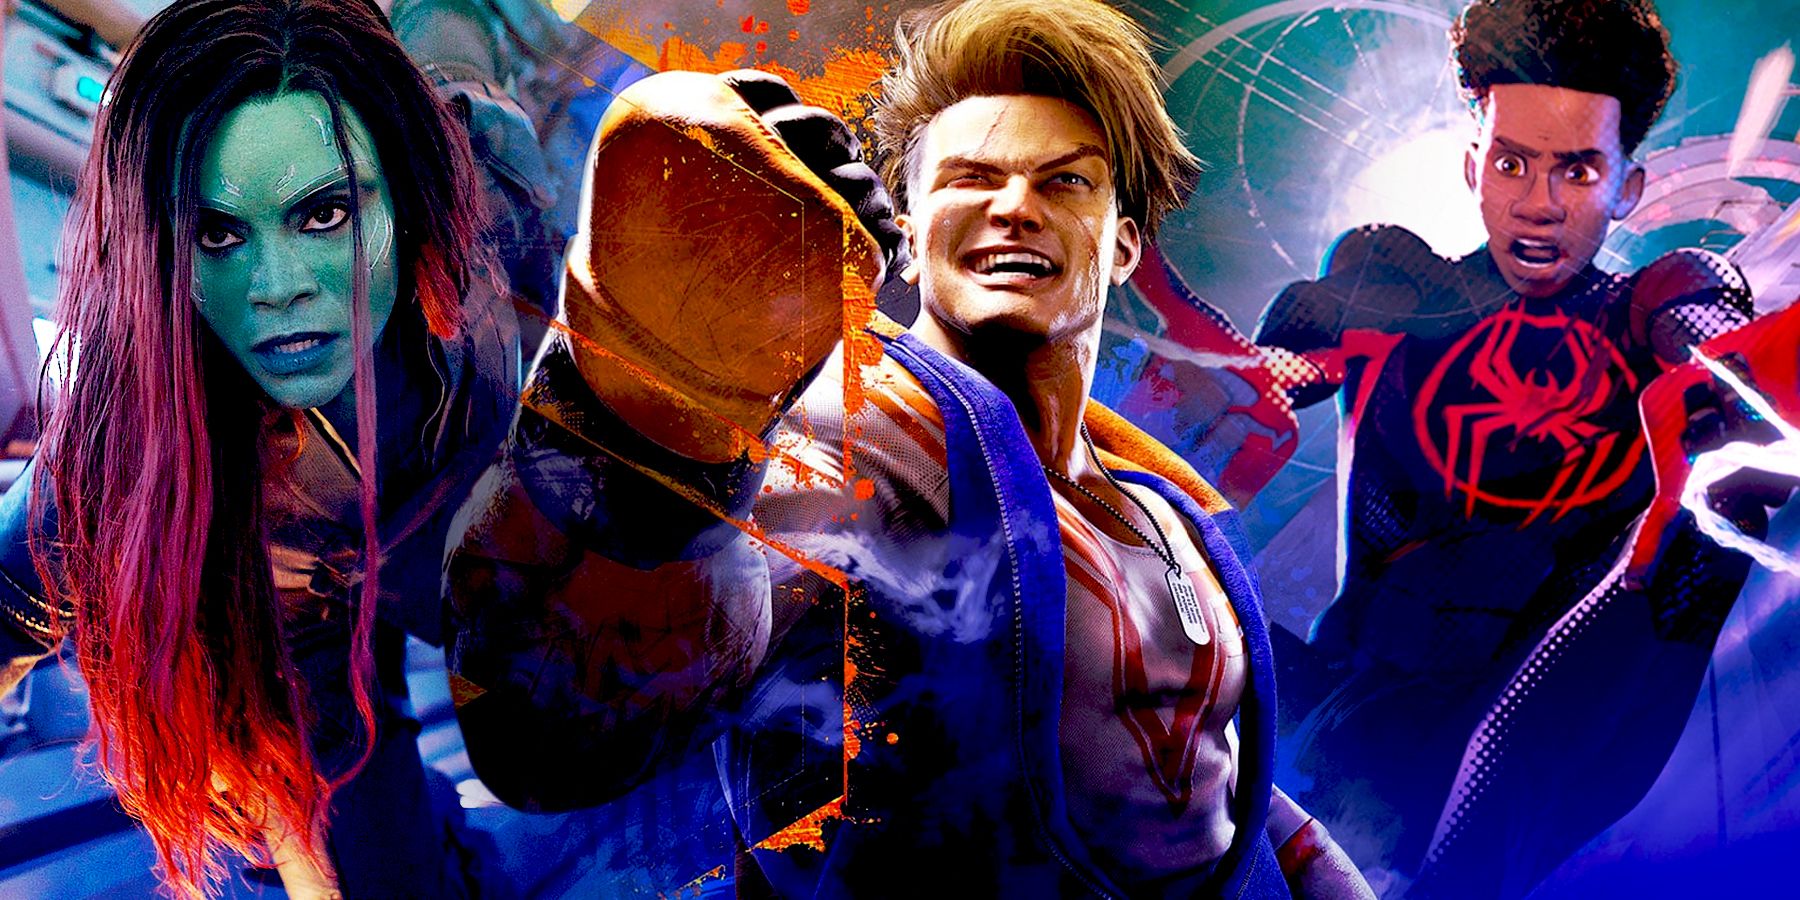 Street Fighter 6' to include 'Street Fighter 2' DLC costumes